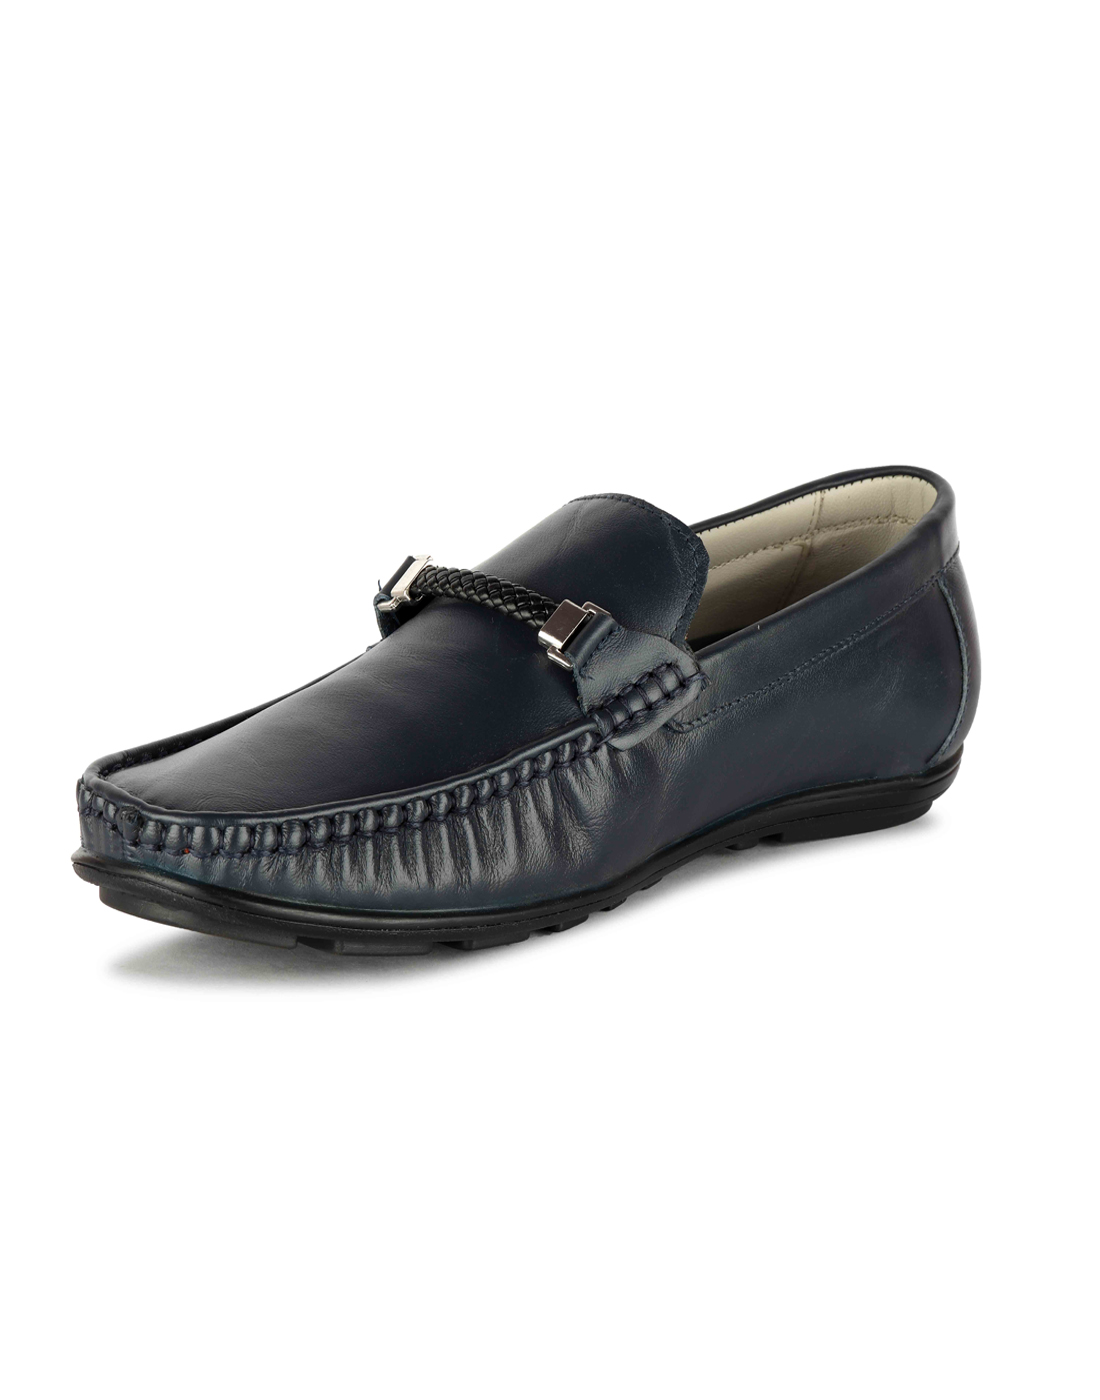 Blue Loafers - Buy Blue Pure Leather Loafers @ Rs.1800 Only | Agra Shoe ...